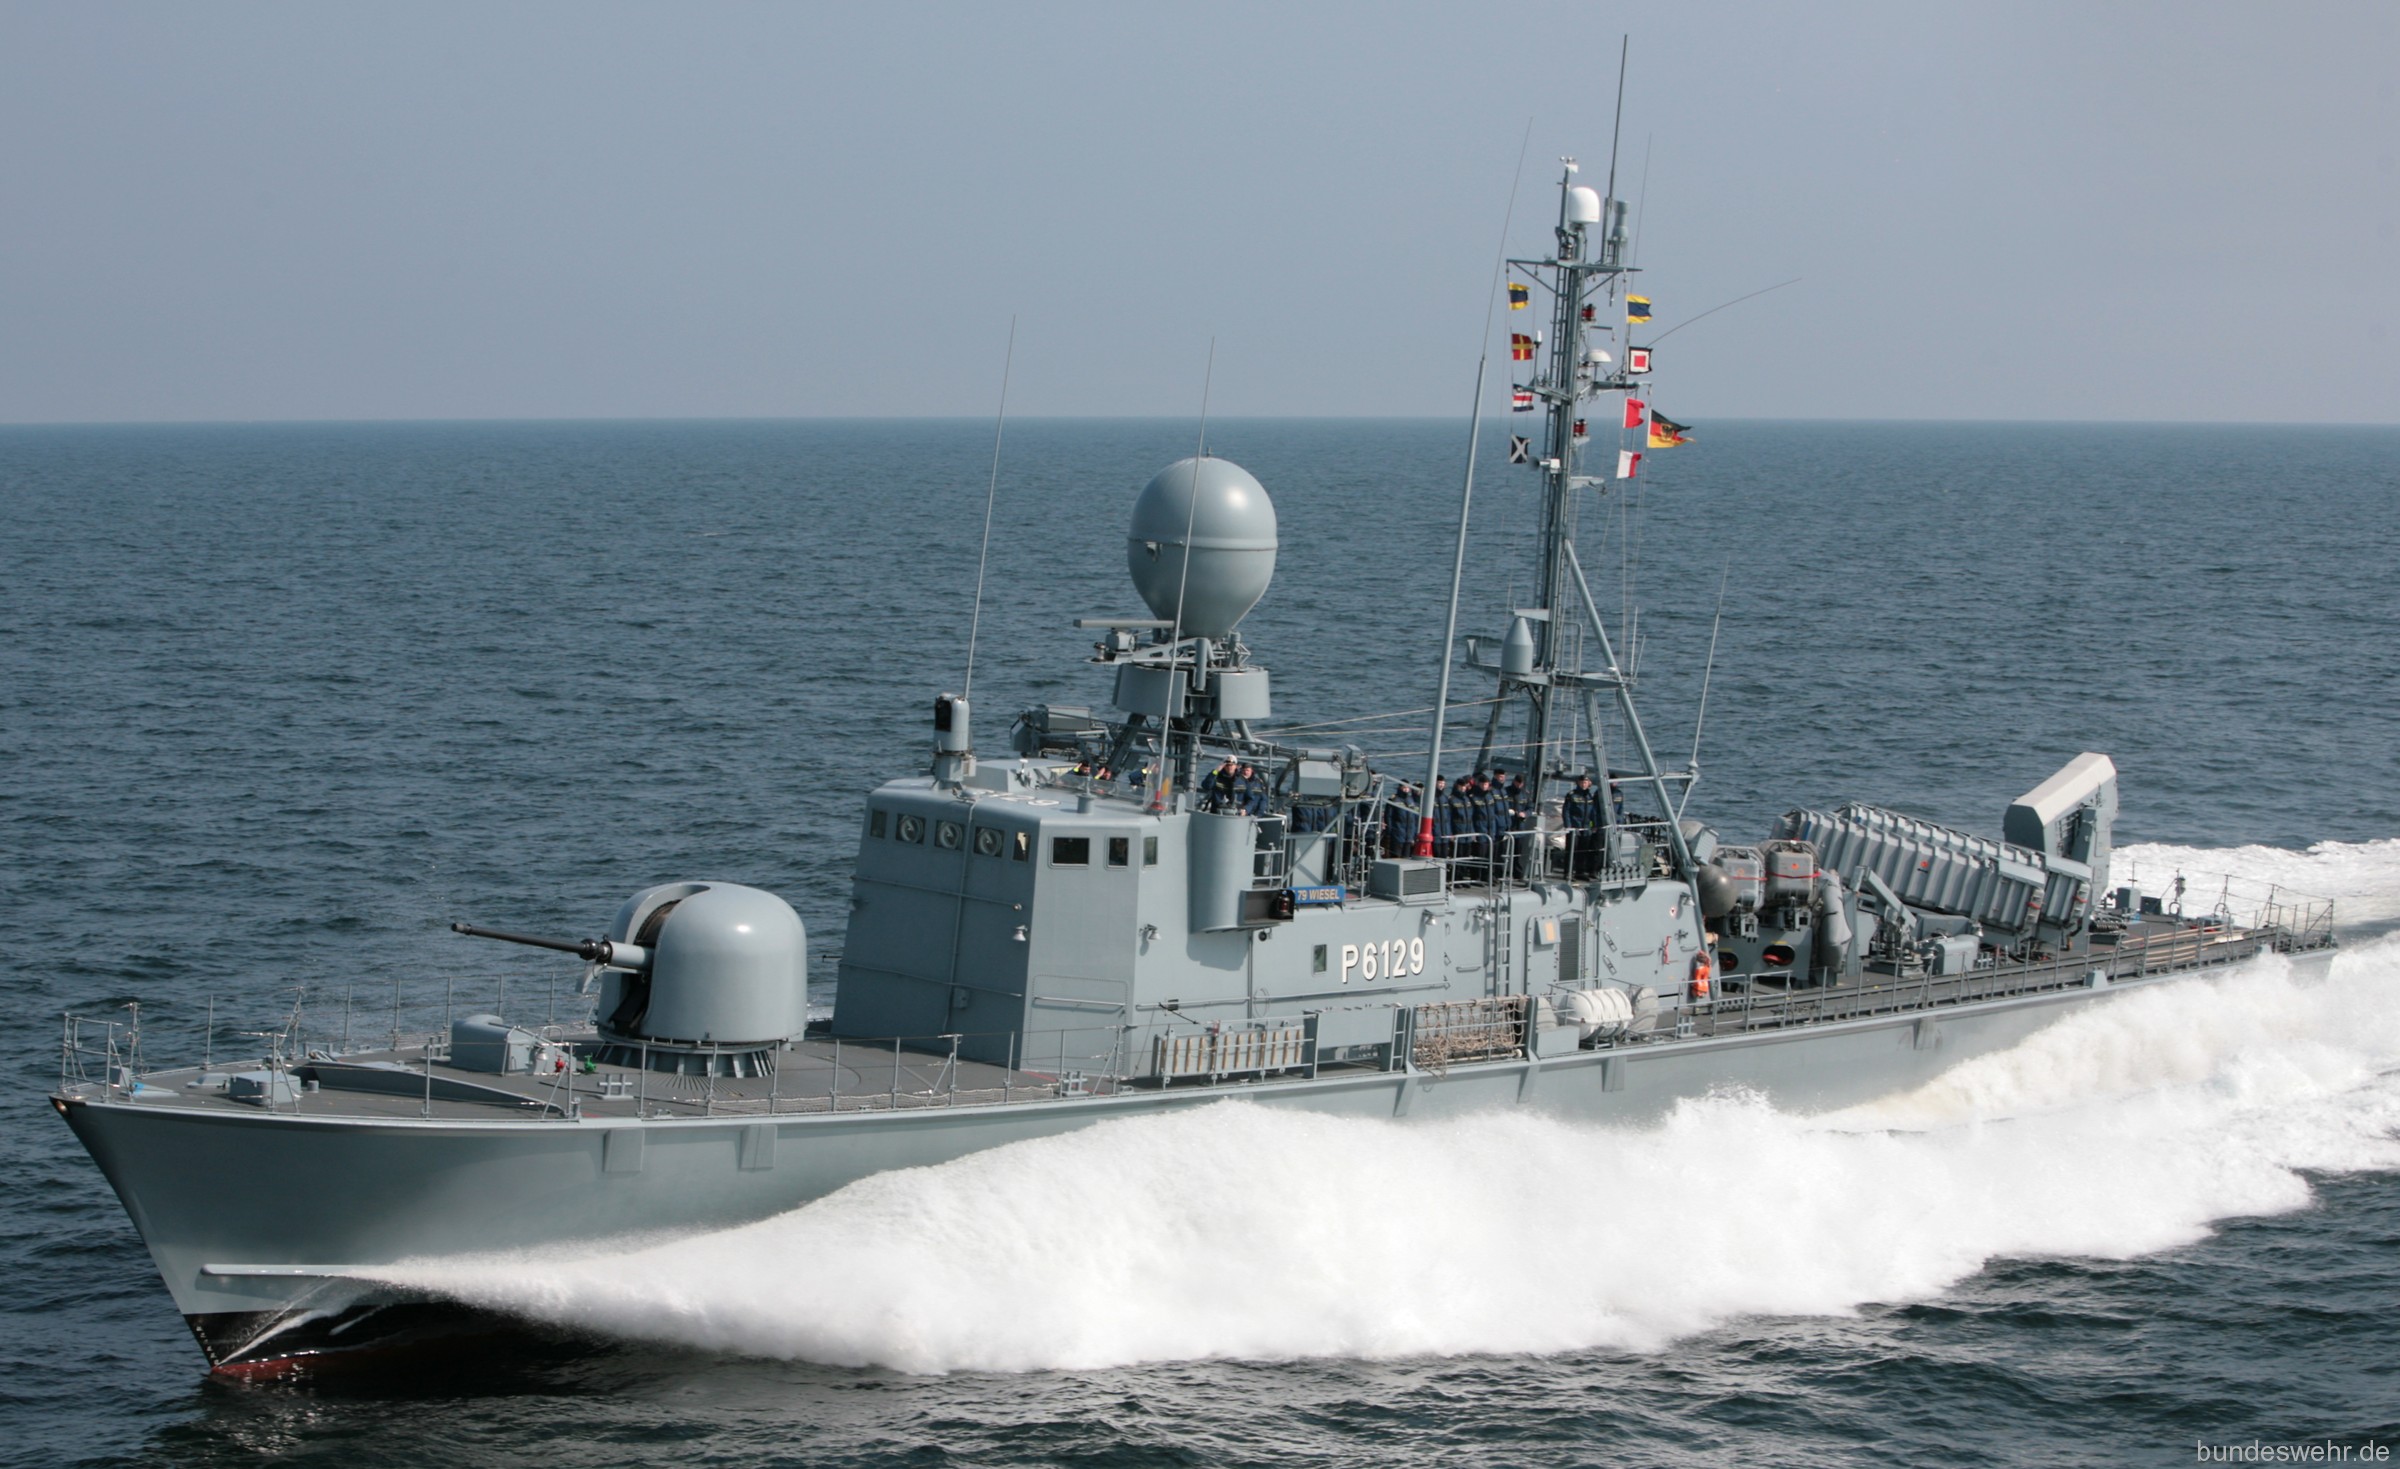 p6129 s79 fgs wiesel type 143a gepard class fast attack missile craft german navy 07